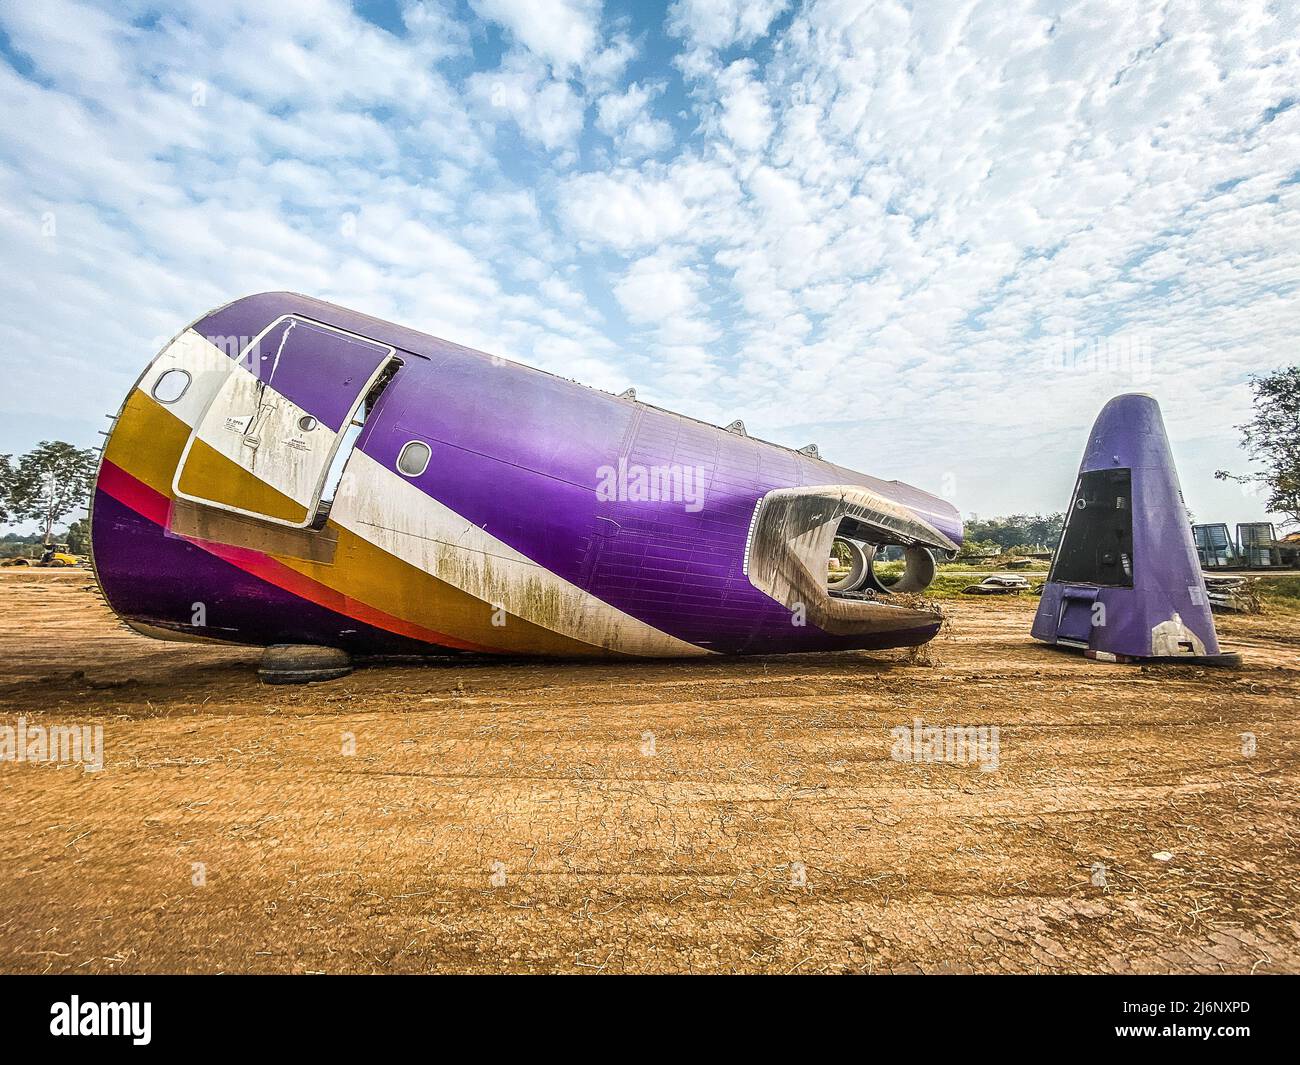 Dumped airplane around Chiang Mai, Thailand, south east Asia Stock Photo